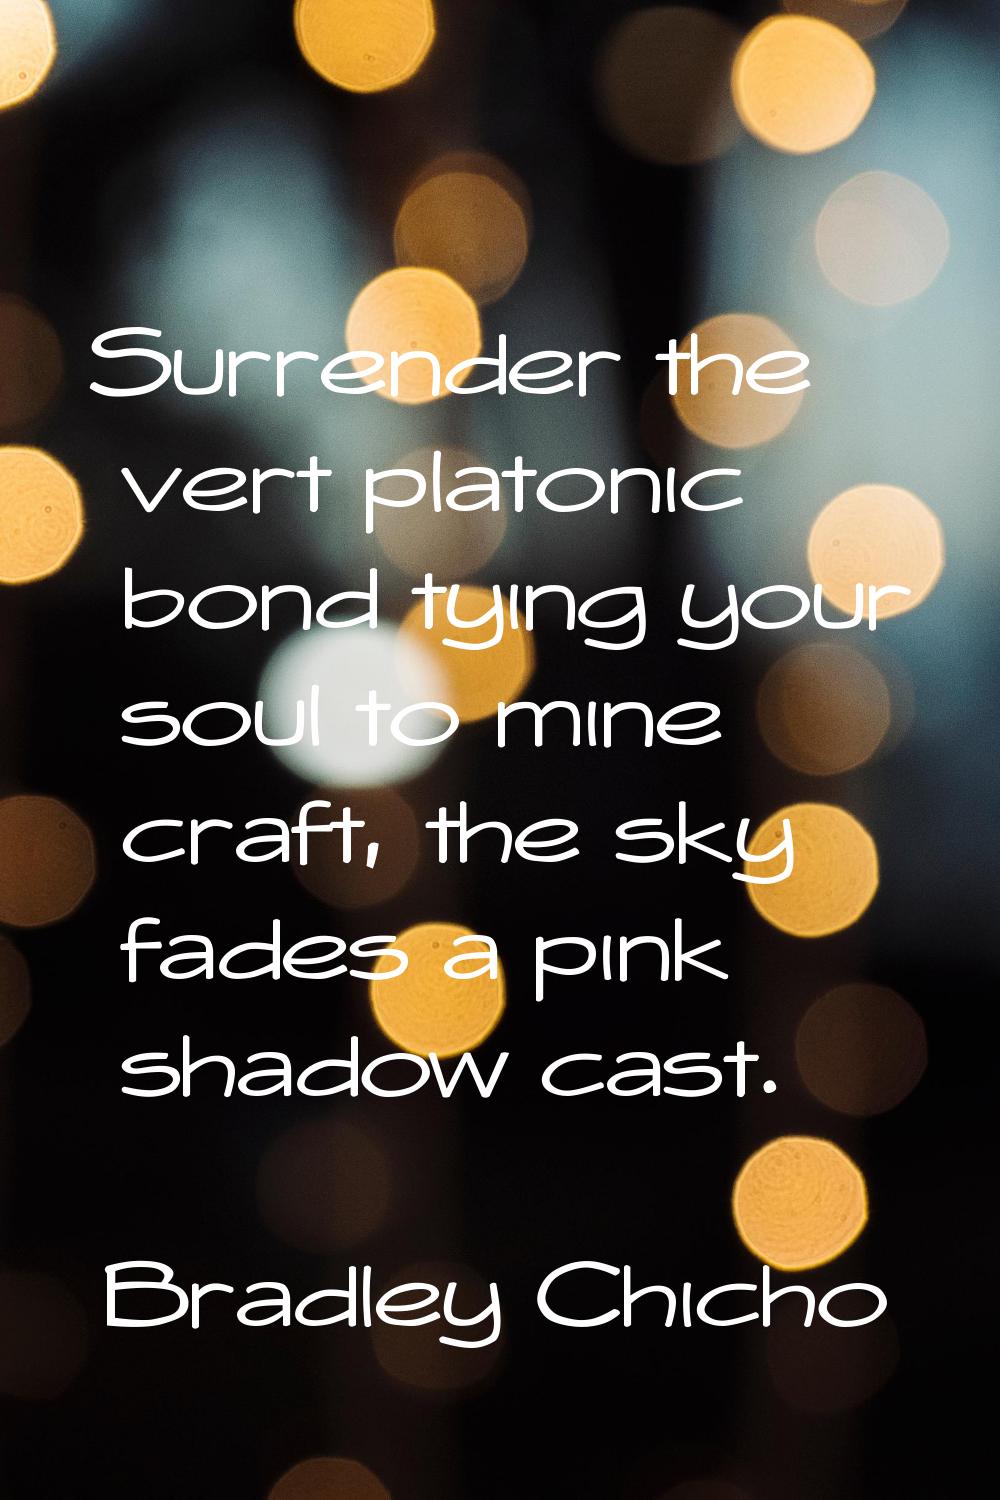 Surrender the vert platonic bond tying your soul to mine craft, the sky fades a pink shadow cast.